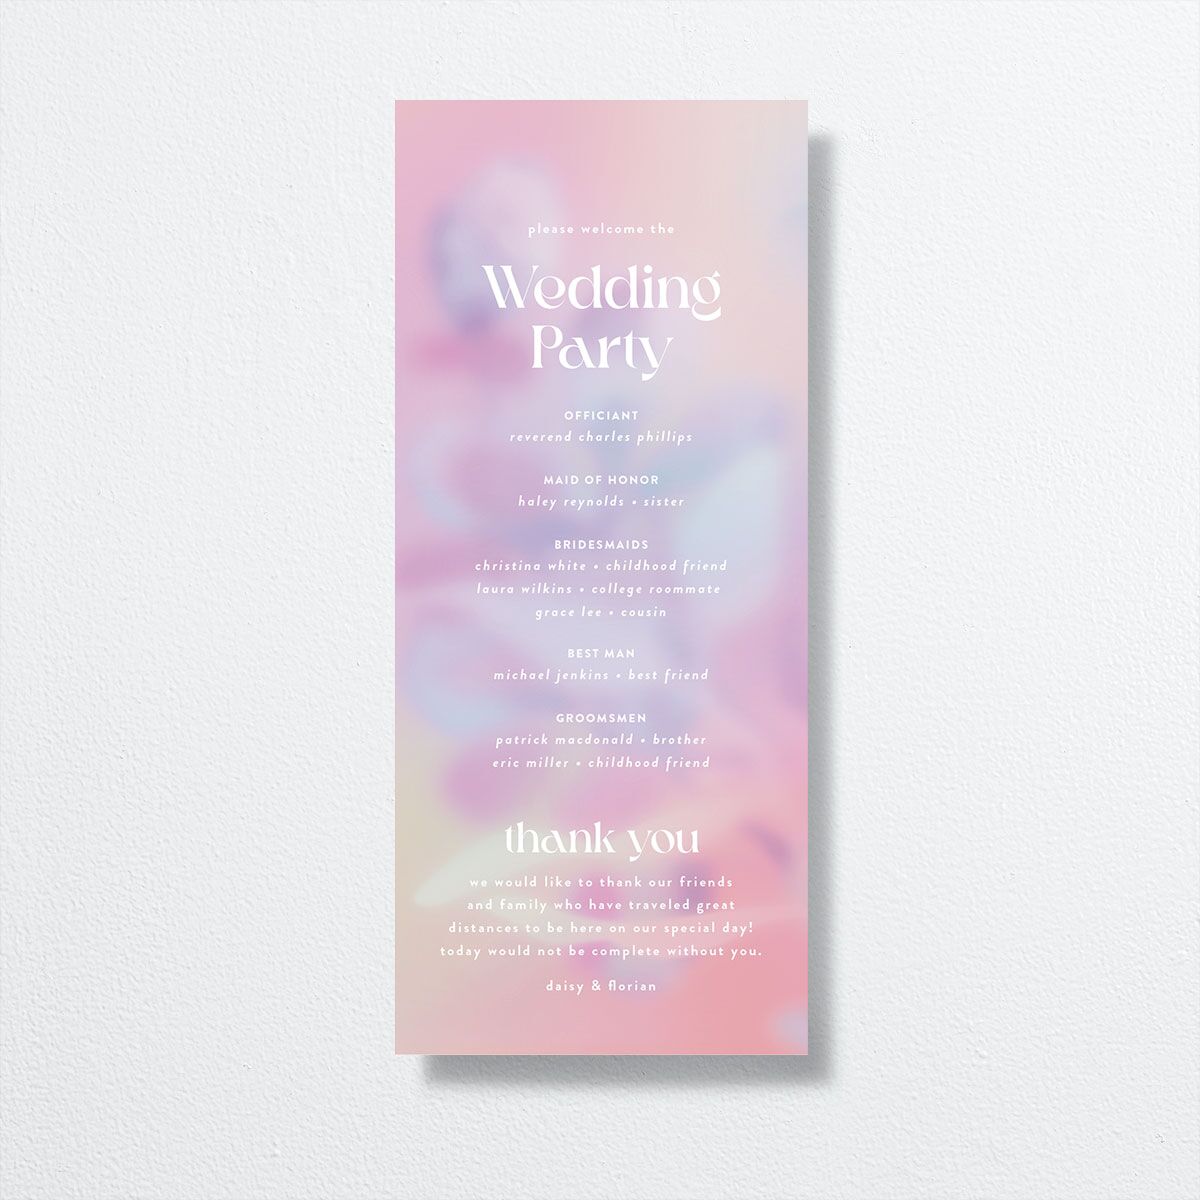 Ethereal Blur Wedding Programs back in pink